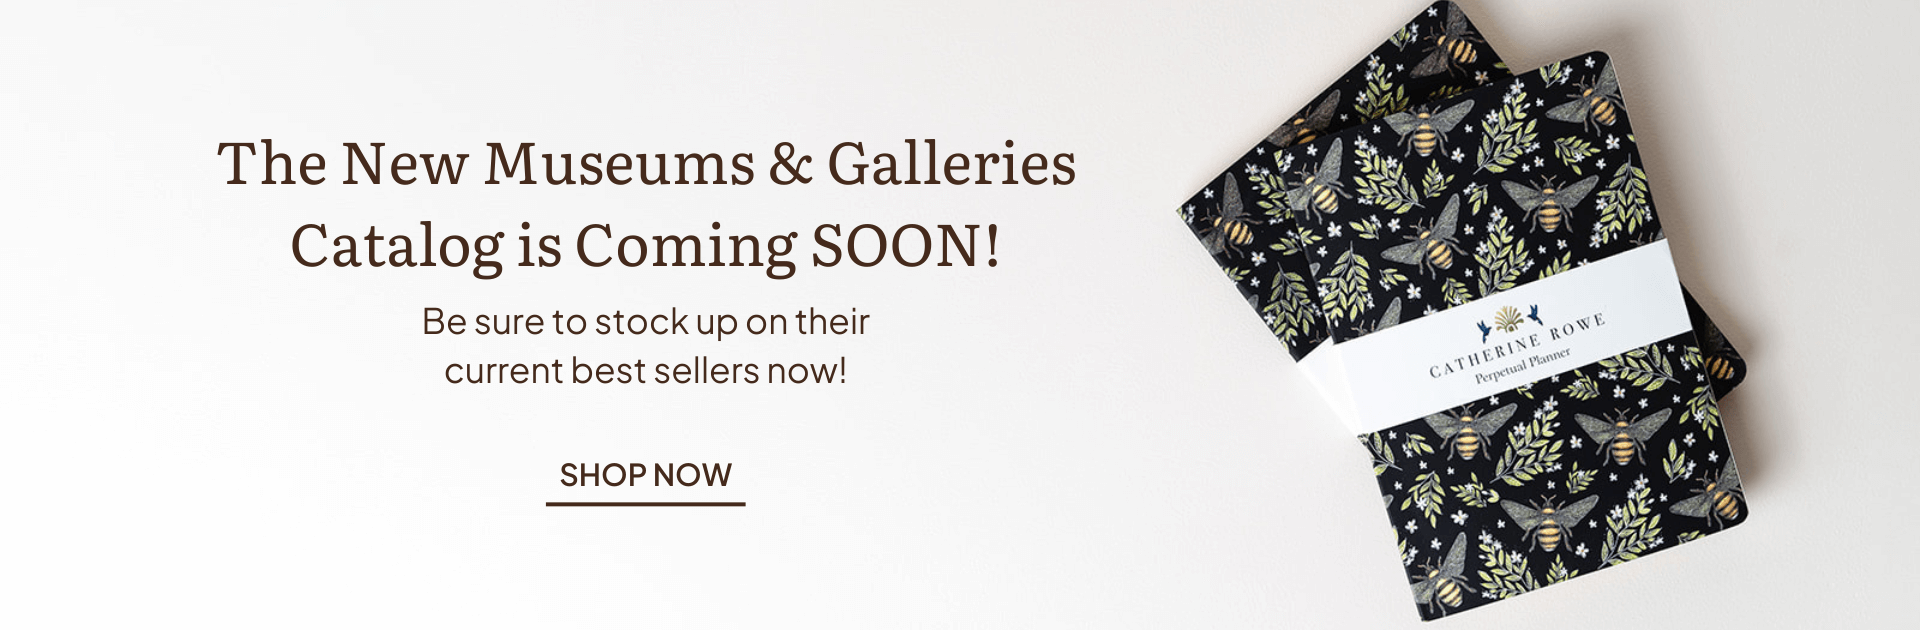 Museums & Galleries catalog coming soon!